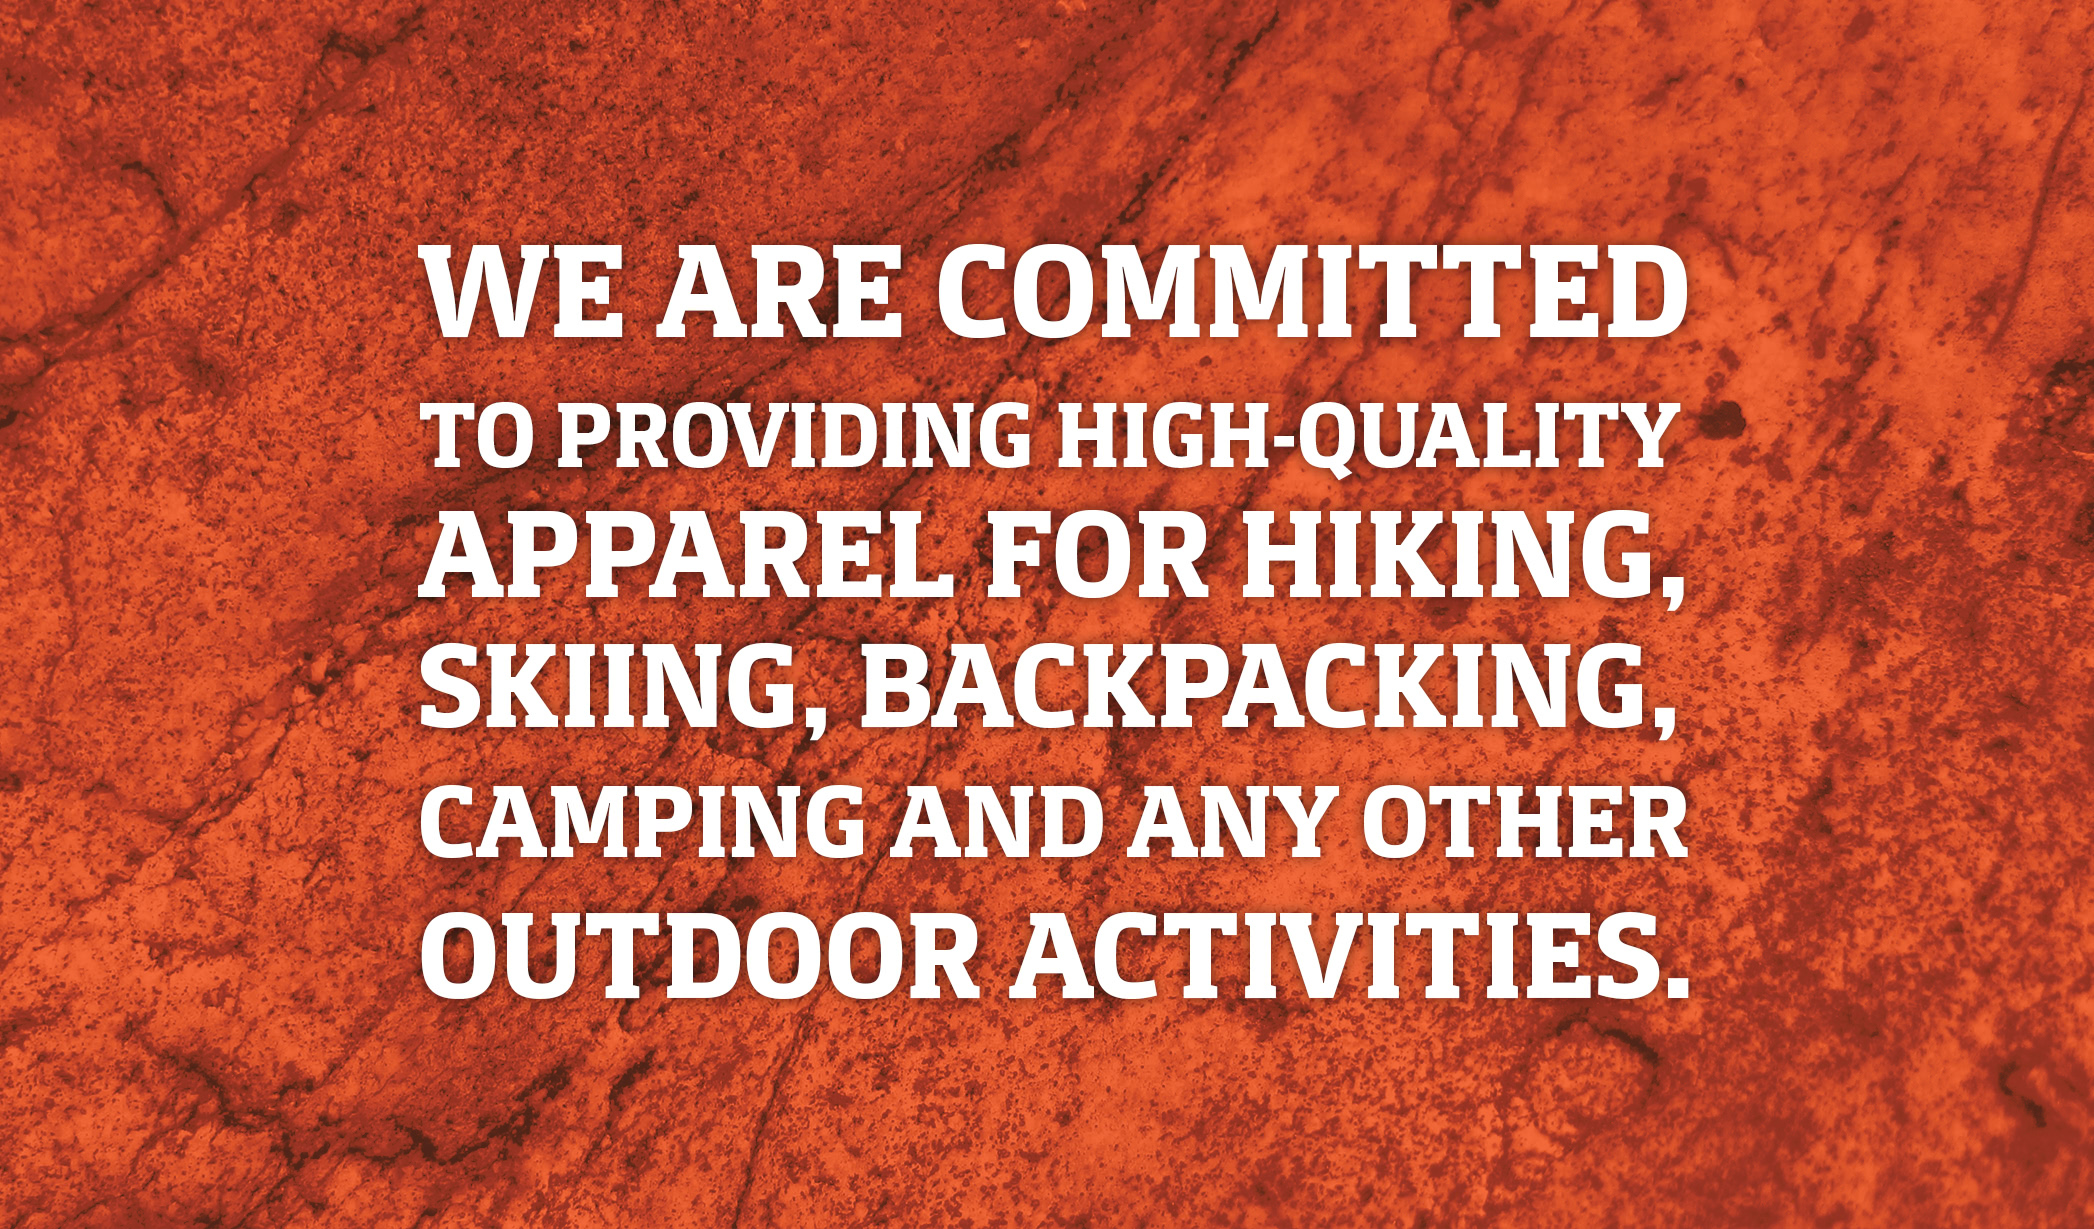 We are committed to providing high-quality apparel for hiking, skiing, backpacking, camping and any other outdoor activities.